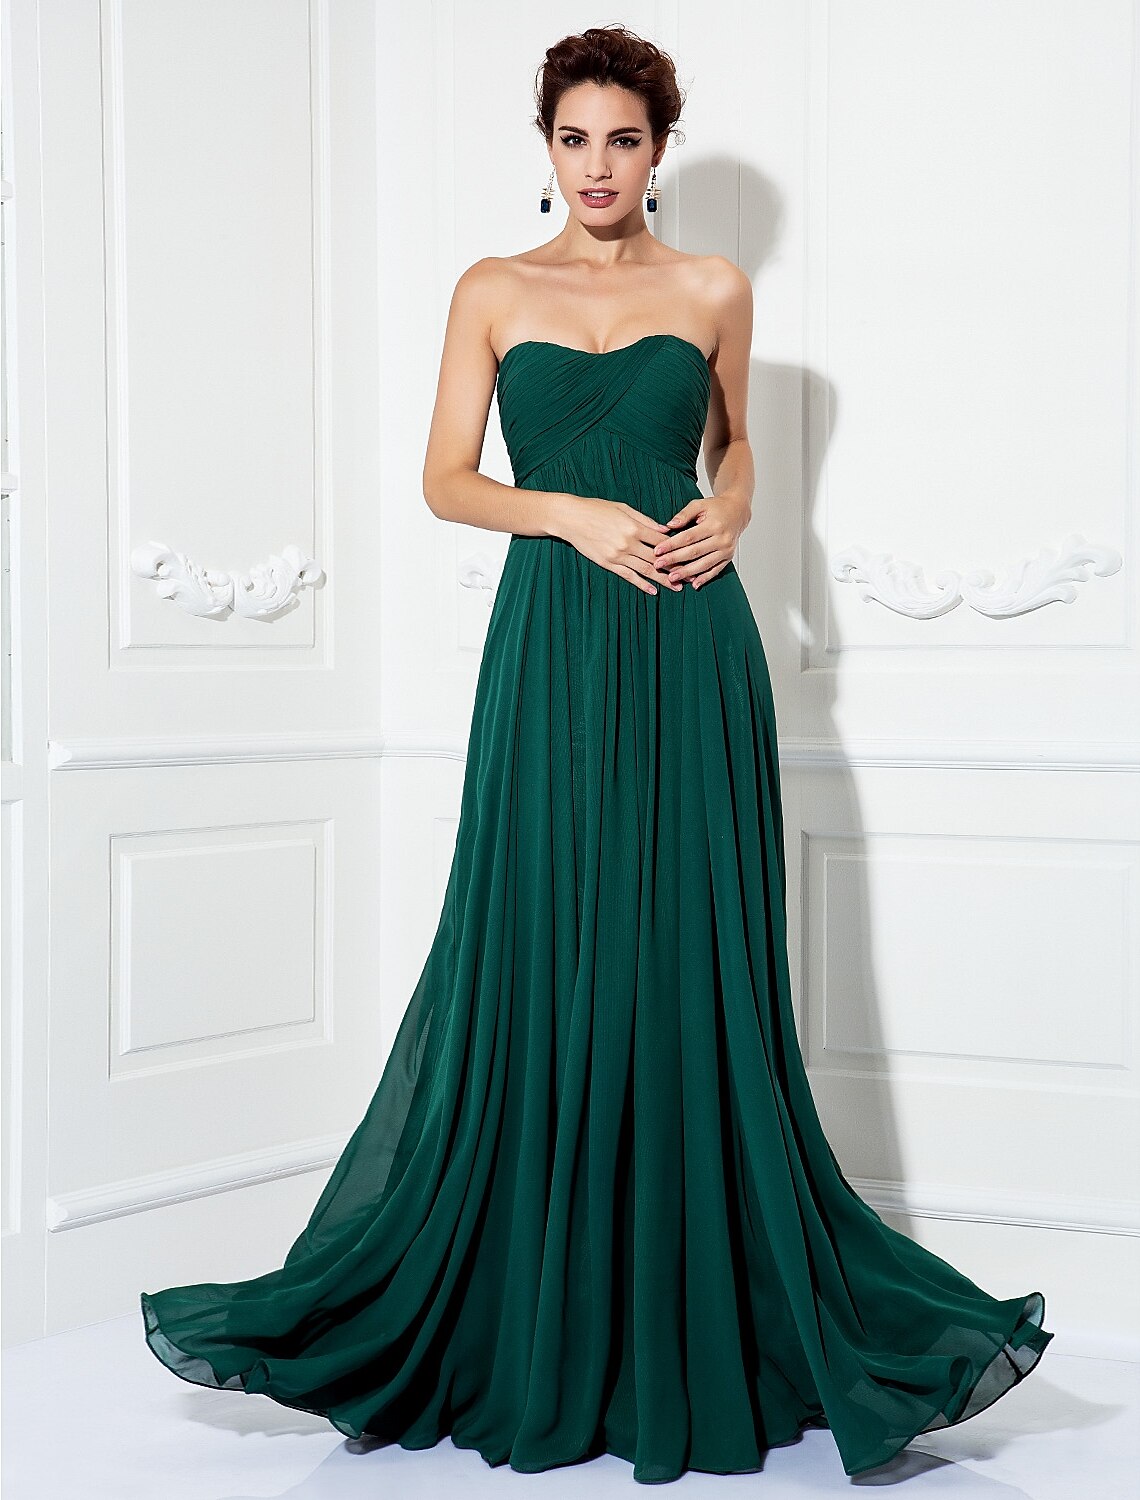 A-Line Minimalist Dress Wedding Guest Formal Evening Sweep / Brush Train Sleeveless Strapless Chiffon with Pleats Ruched